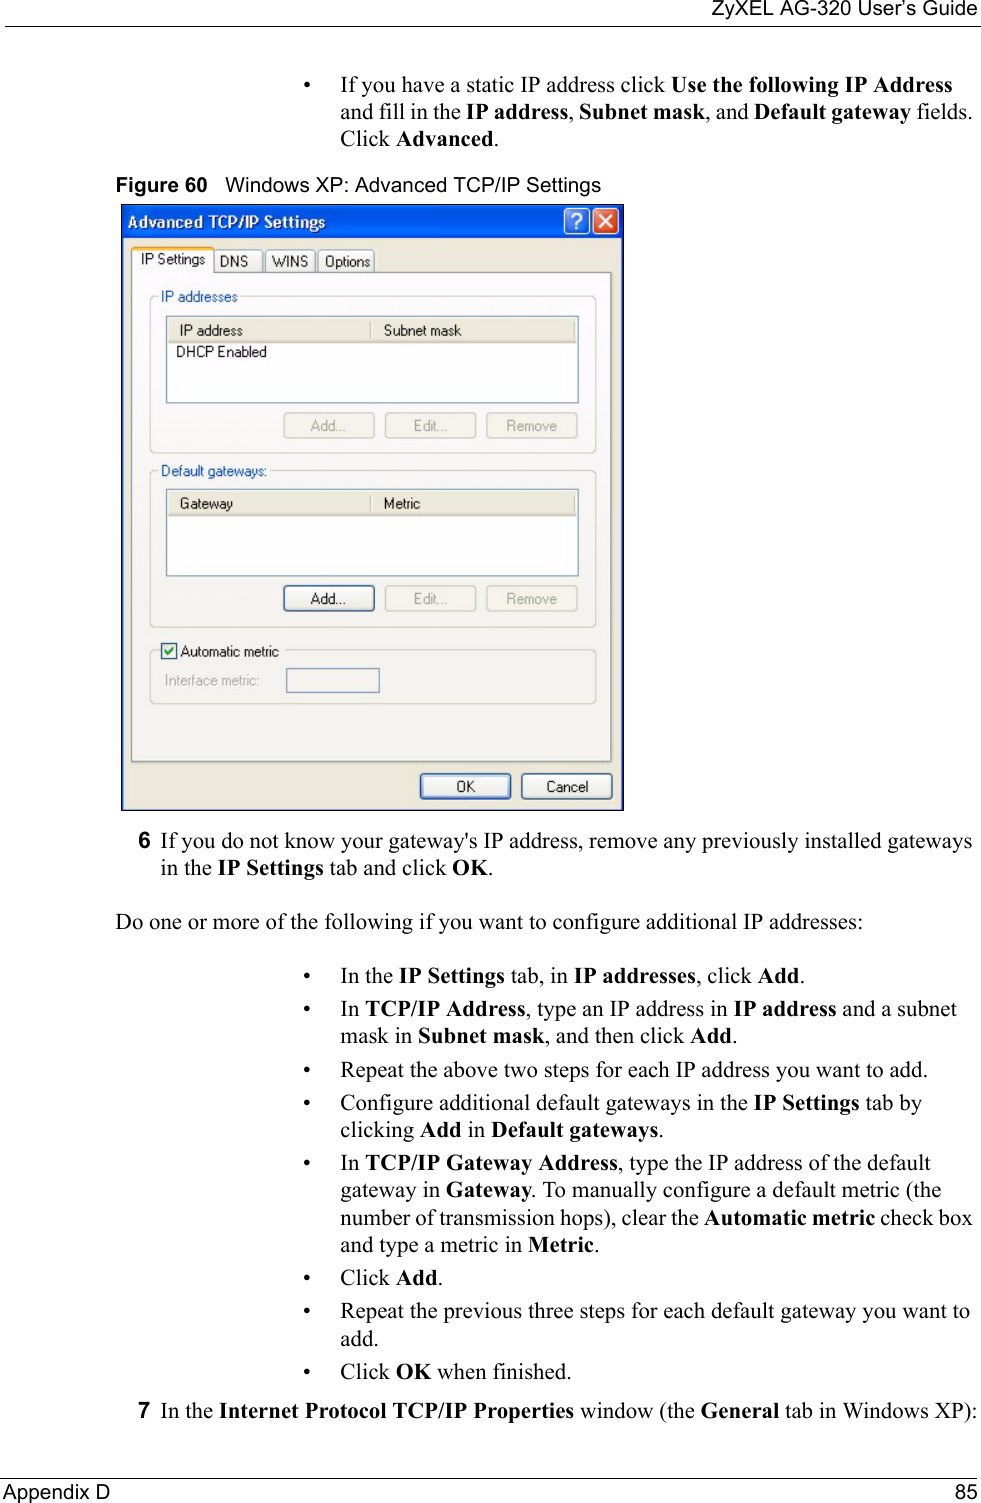 ZyXEL AG-320 User’s GuideAppendix D 85• If you have a static IP address click Use the following IP Address and fill in the IP address, Subnet mask, and Default gateway fields. Click Advanced.Figure 60   Windows XP: Advanced TCP/IP Settings6If you do not know your gateway&apos;s IP address, remove any previously installed gateways in the IP Settings tab and click OK.Do one or more of the following if you want to configure additional IP addresses:•In the IP Settings tab, in IP addresses, click Add.•In TCP/IP Address, type an IP address in IP address and a subnet mask in Subnet mask, and then click Add.• Repeat the above two steps for each IP address you want to add.• Configure additional default gateways in the IP Settings tab by clicking Add in Default gateways.•In TCP/IP Gateway Address, type the IP address of the default gateway in Gateway. To manually configure a default metric (the number of transmission hops), clear the Automatic metric check box and type a metric in Metric.• Click Add. • Repeat the previous three steps for each default gateway you want to add.• Click OK when finished.7In the Internet Protocol TCP/IP Properties window (the General tab in Windows XP):